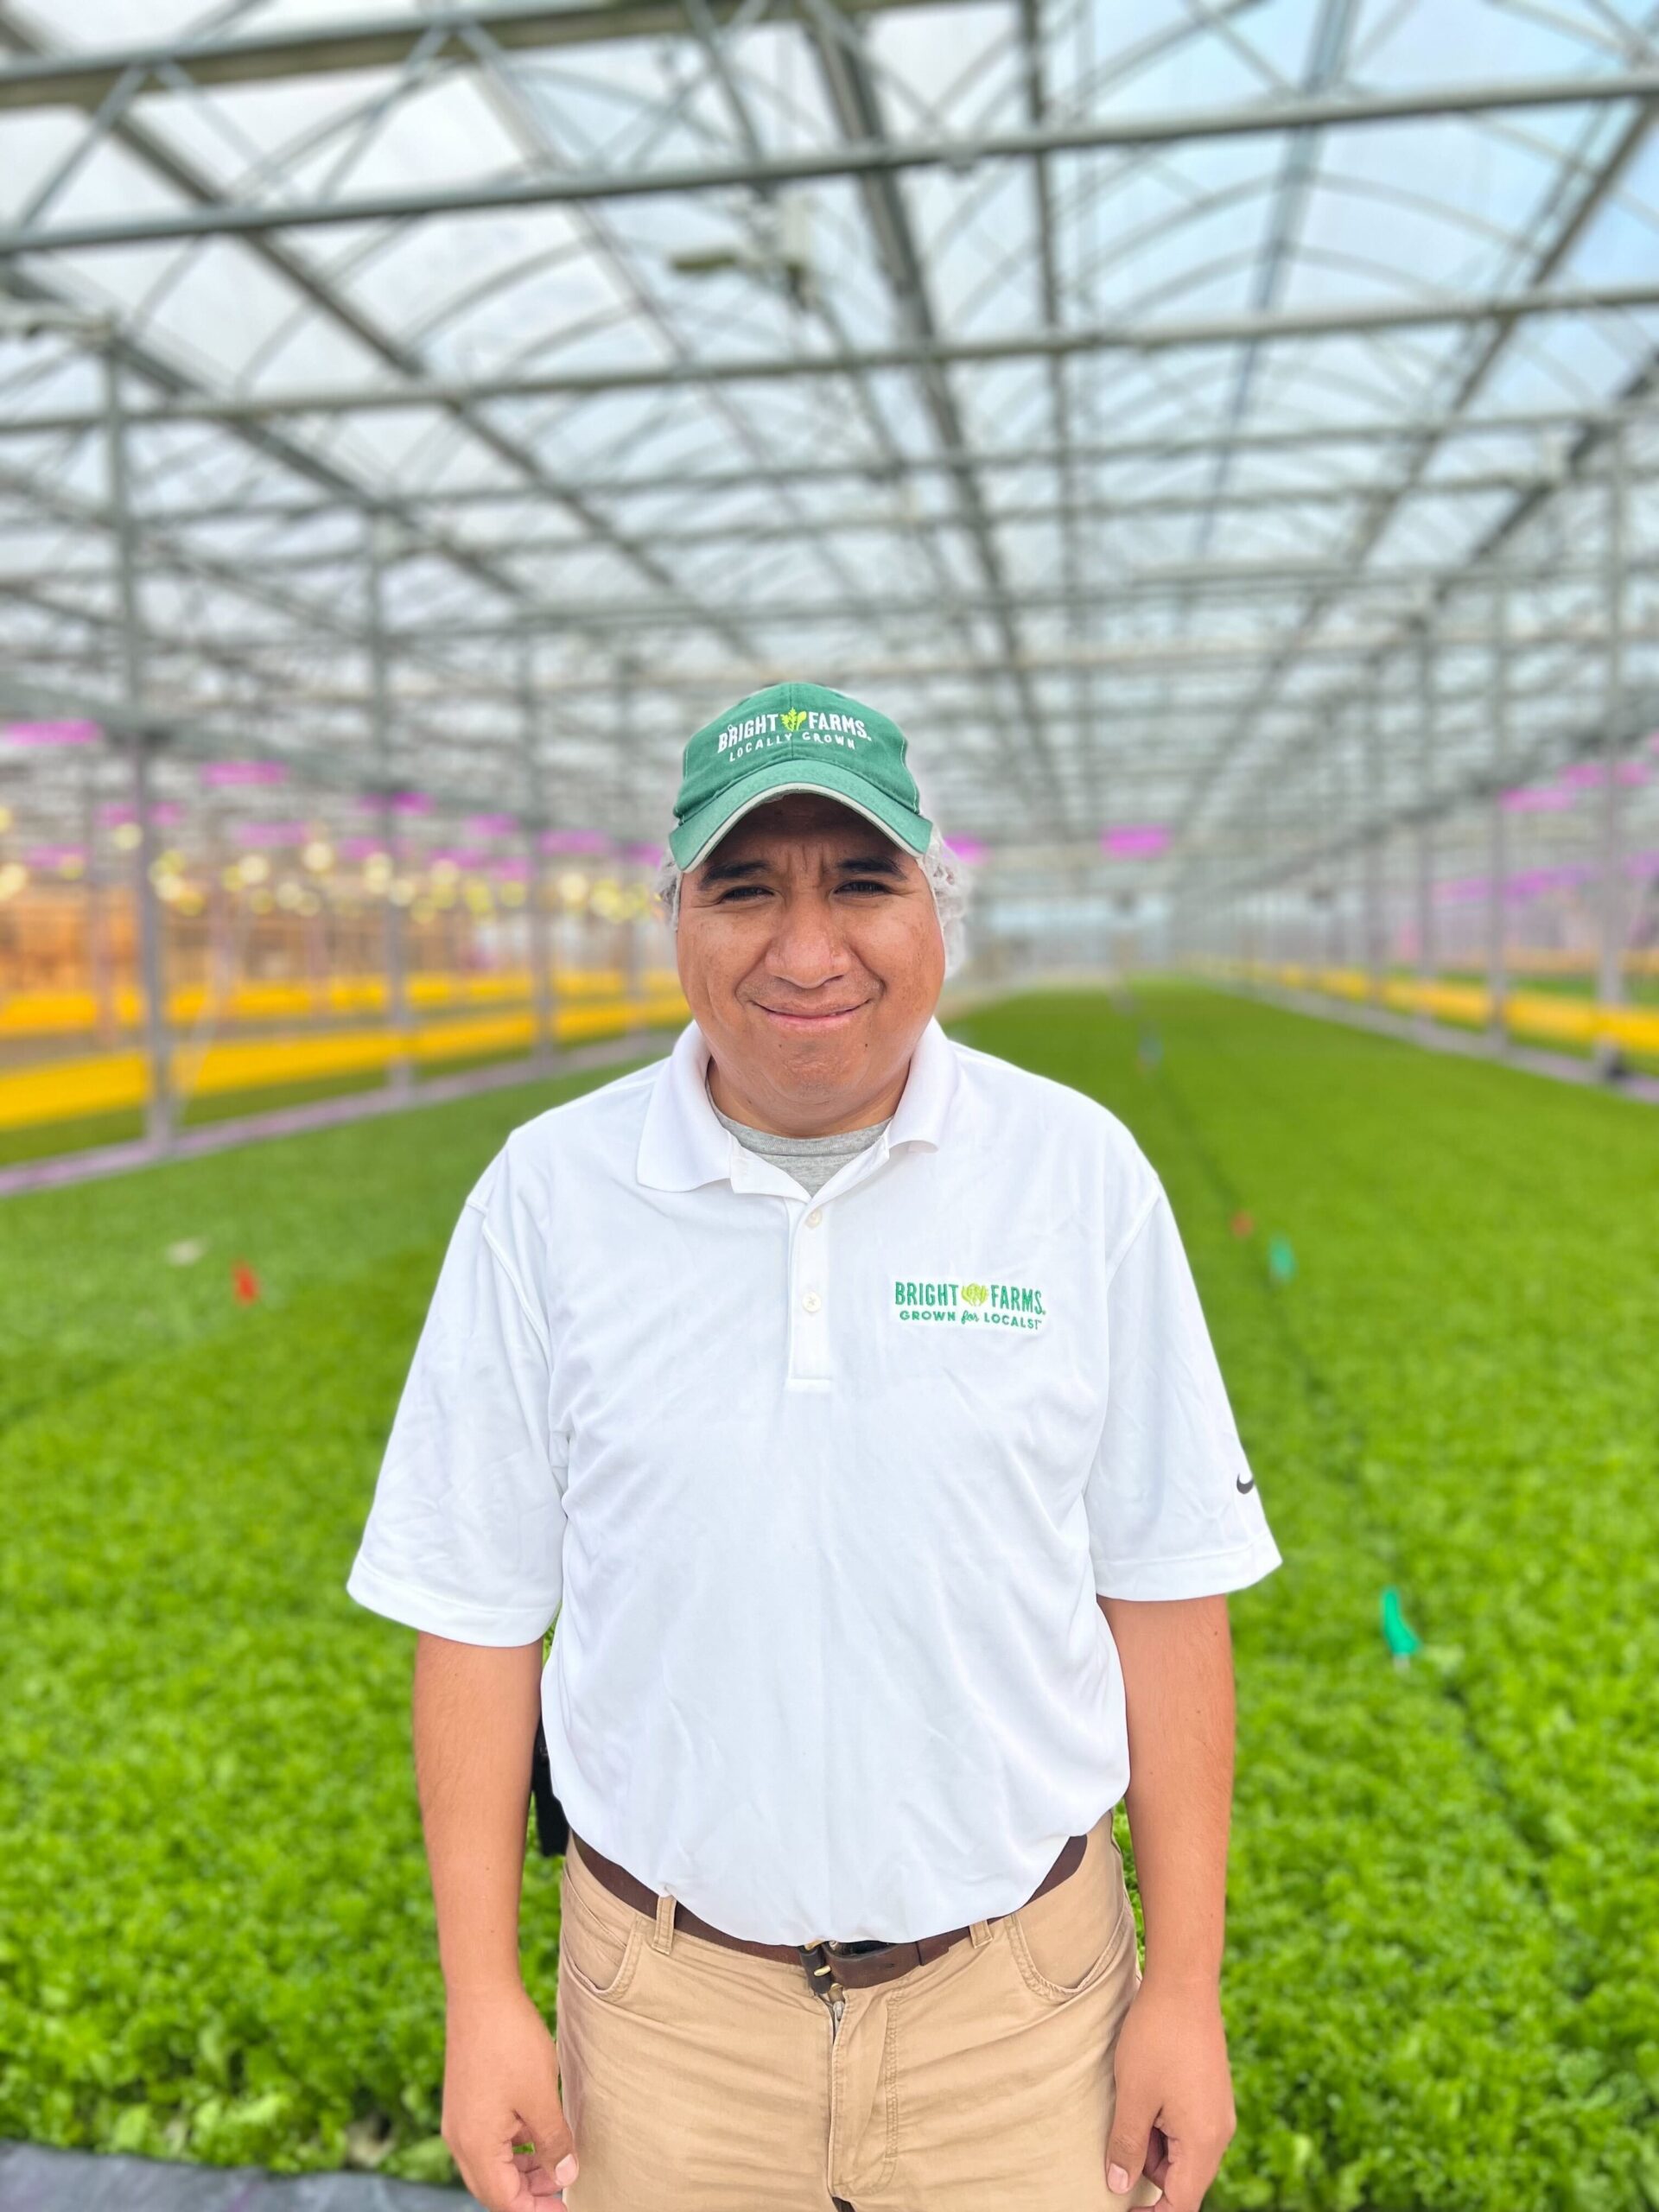 Agri of Virginia, Inc. – Your Farm and greenhouse supply company